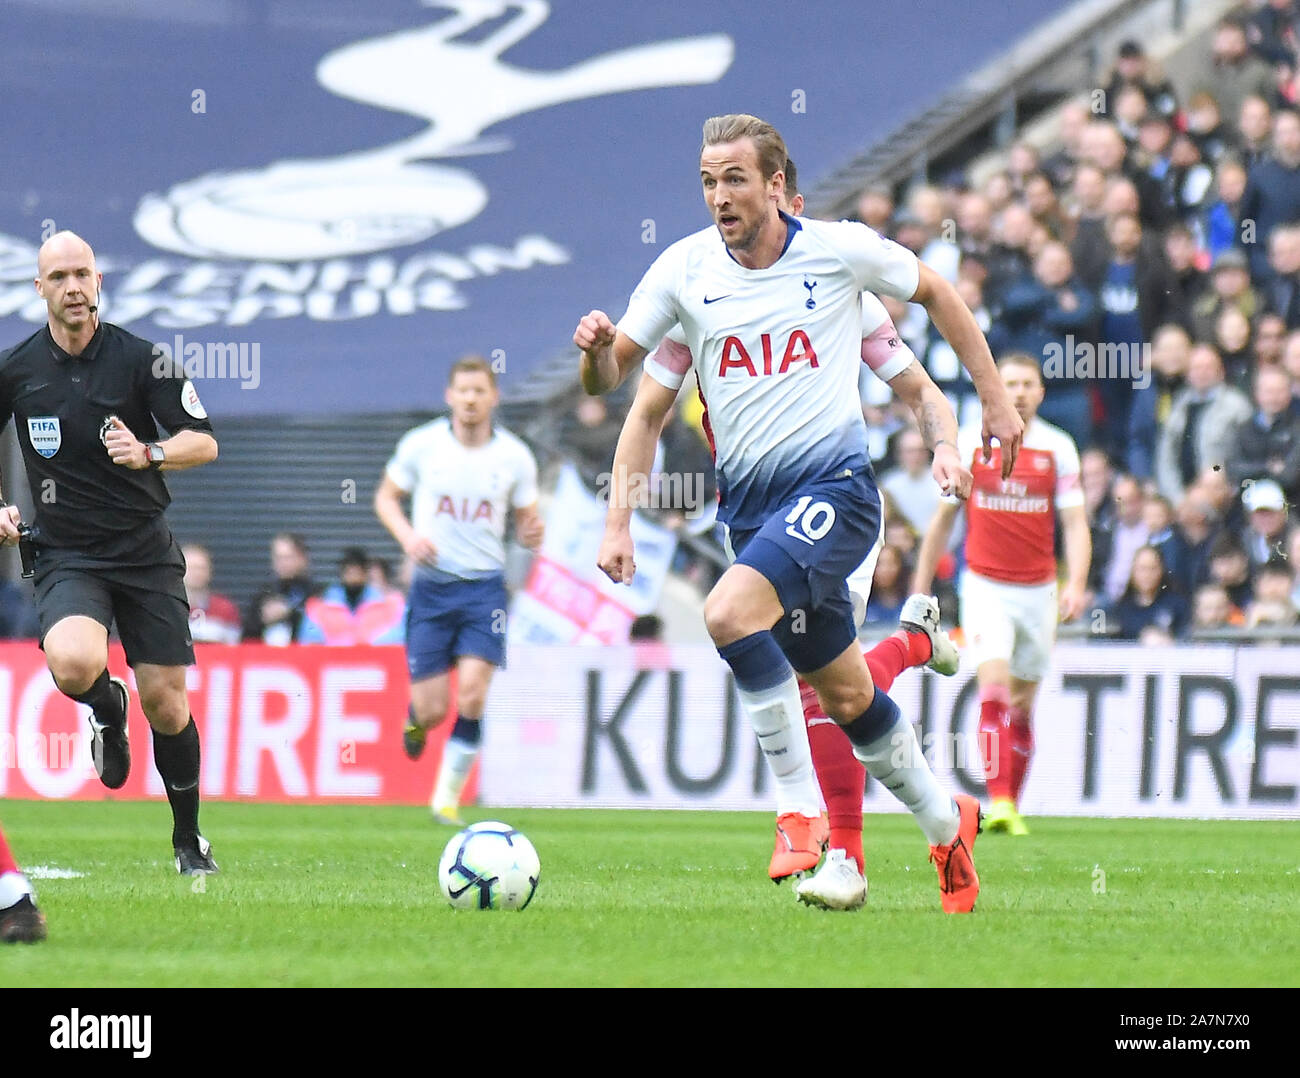 LONDON, ENGLAND - MARCH 2, 2019: Harry Kane of Tottenham pictured during the 2018/19 Premier League game between Tottenham Hotspur and Arsenal FC at Wembley Stadium. Stock Photo